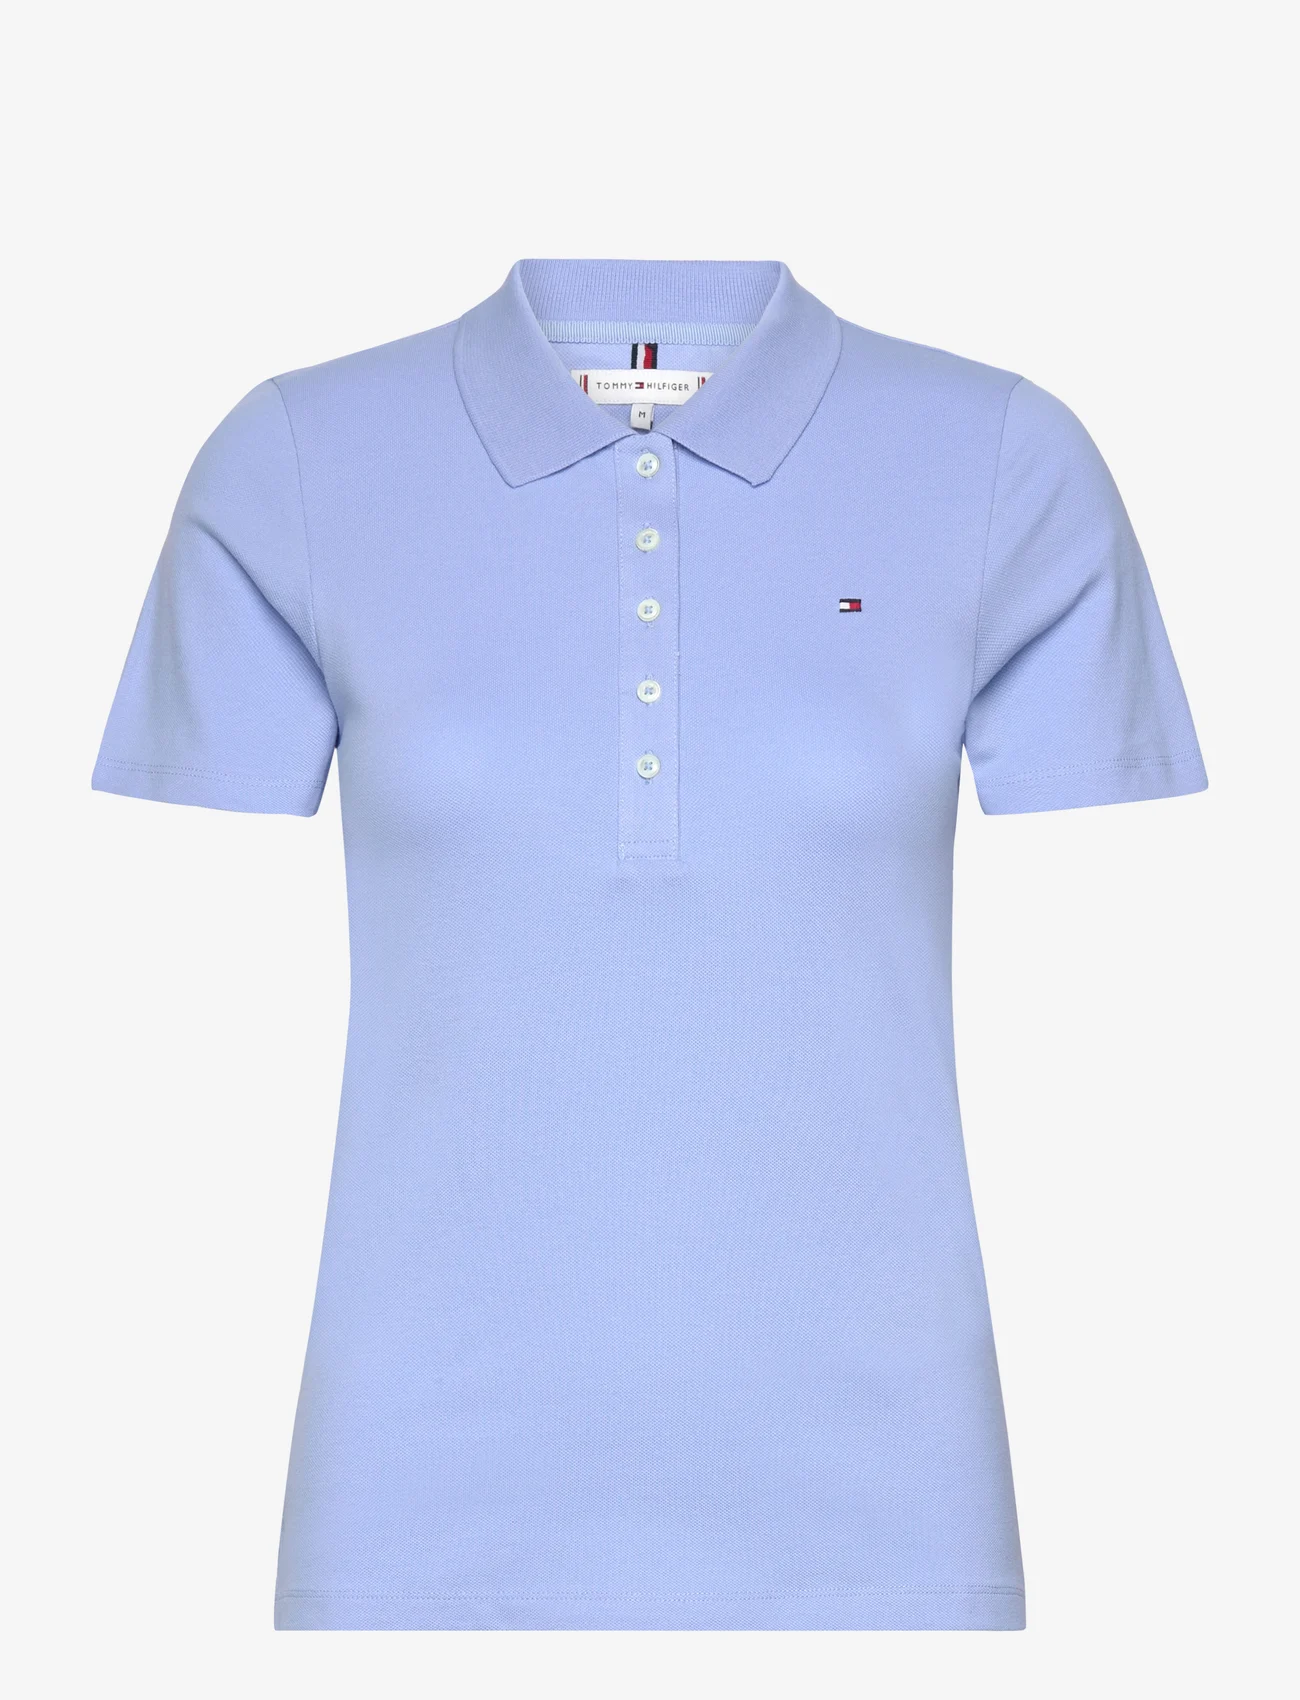 Tommy Hilfiger - 1985 SLIM PIQUE POLO SS - t-shirts & tops - vessel blue - 0